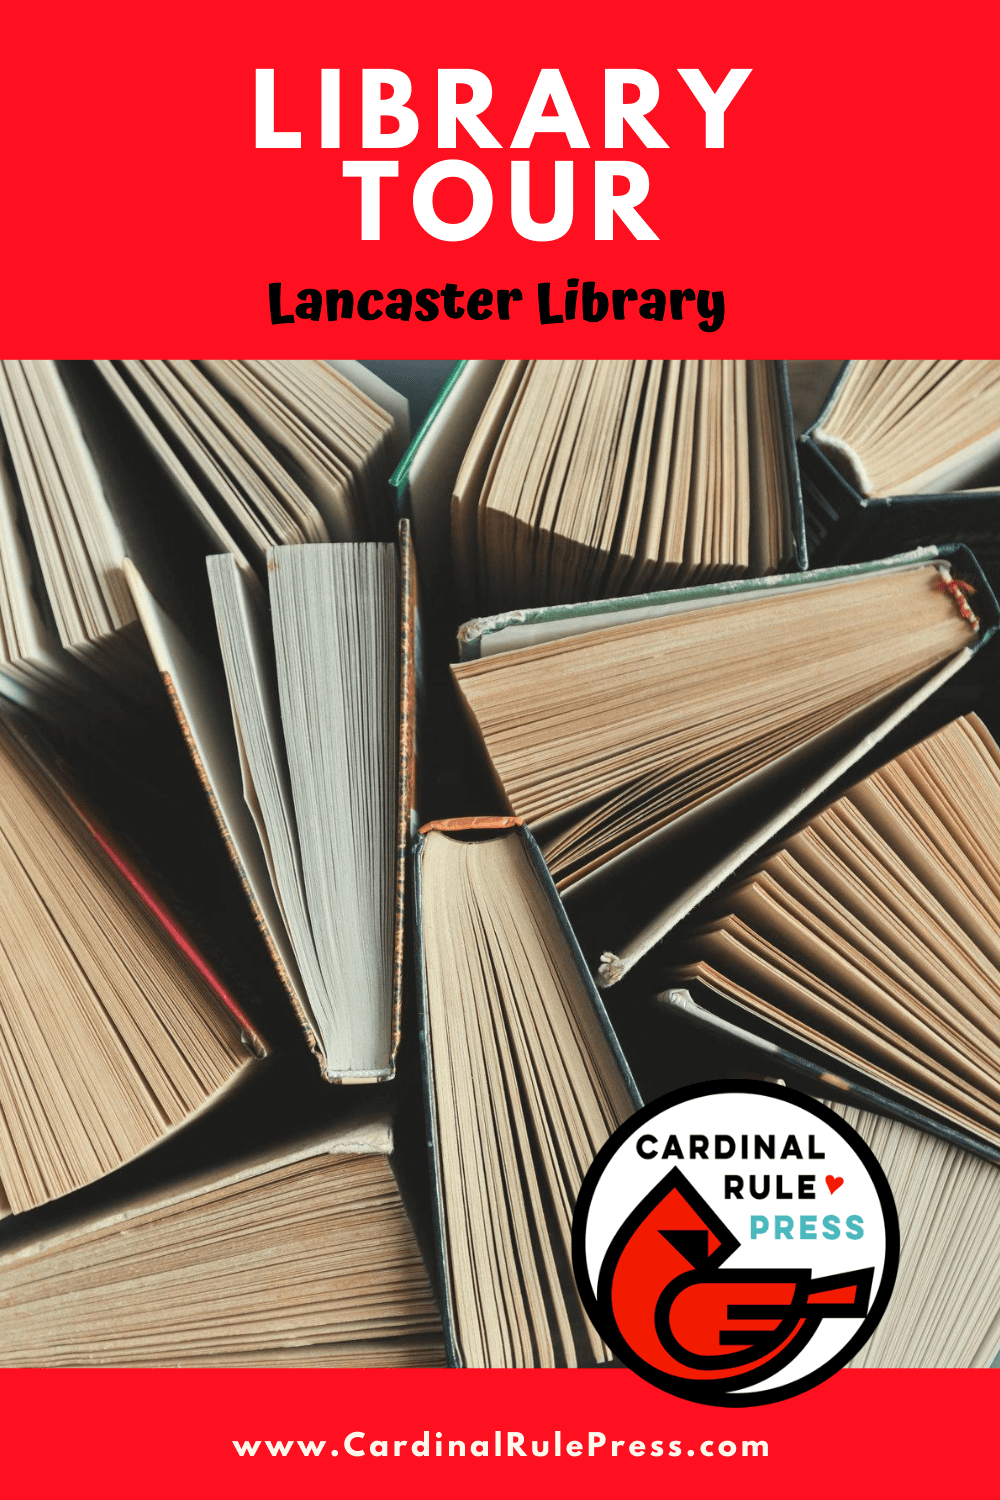 Summer Library Tour: Lancaster Library-Let's hear from Matthew Bushong at the Lancaster Library and find out how they used creative thinking to present out of the box ideas to their readers. #LancasterLibrary #LibraryTour #SummerTour